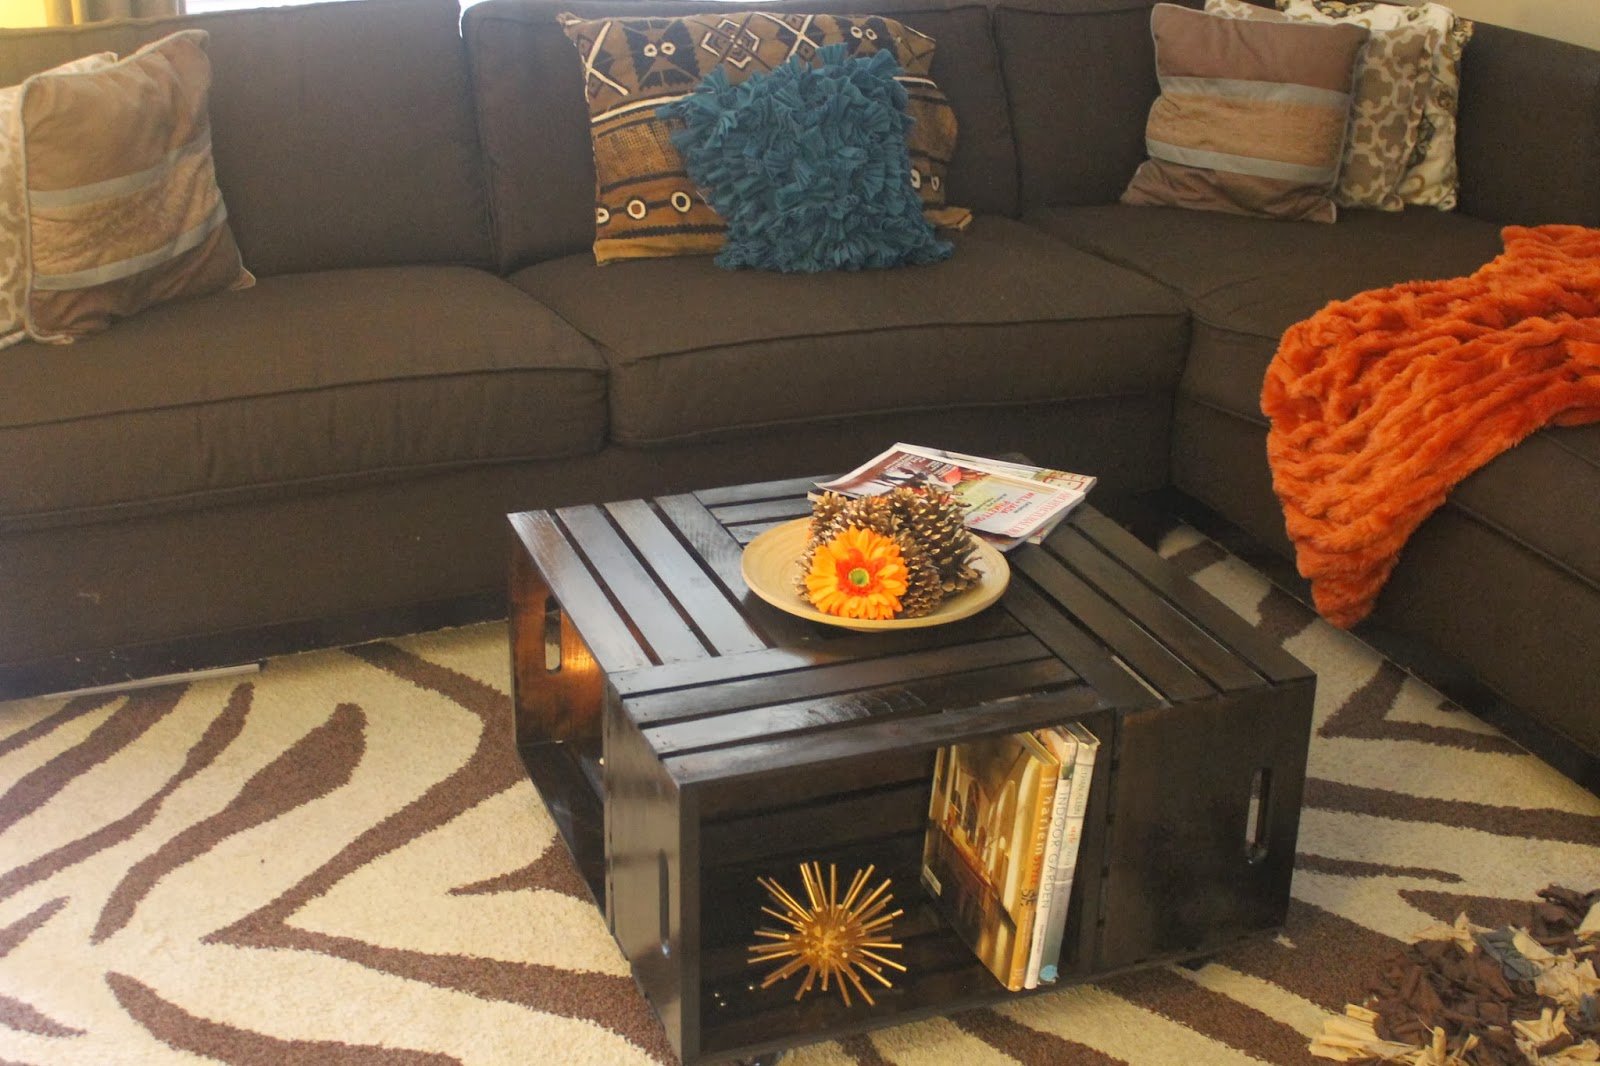 20 DIY Wooden Crate Coffee Tables | Guide Patterns